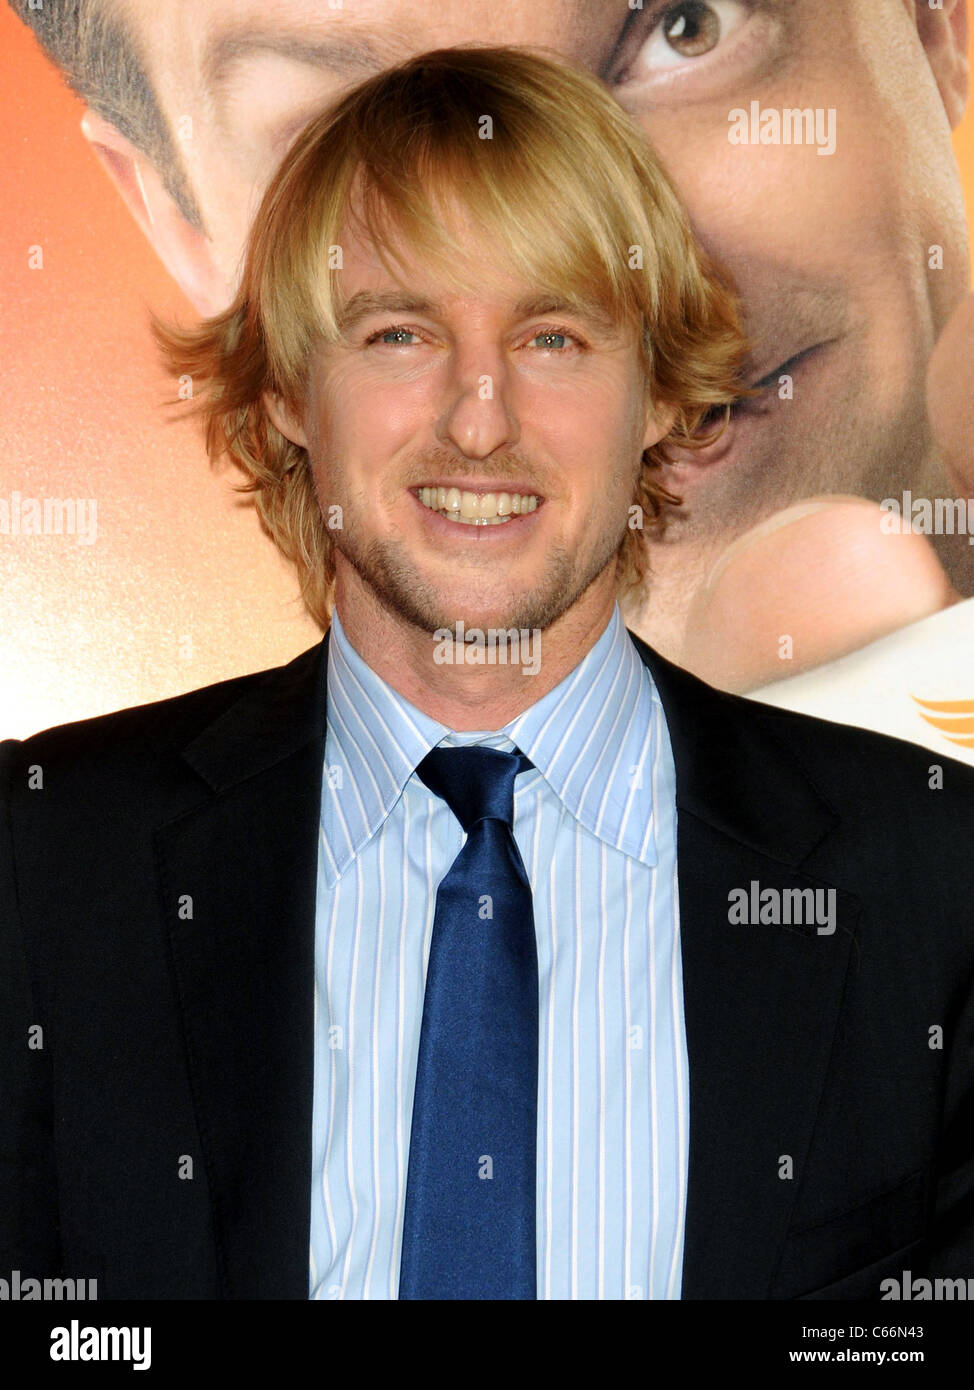 Owen Wilson at arrivals for HALL PASS Premiere, Arclight Cinerama Dome, Los Angeles, CA February 23, 2011. Photo By: Dee Cercone/Everett Collection Stock Photo